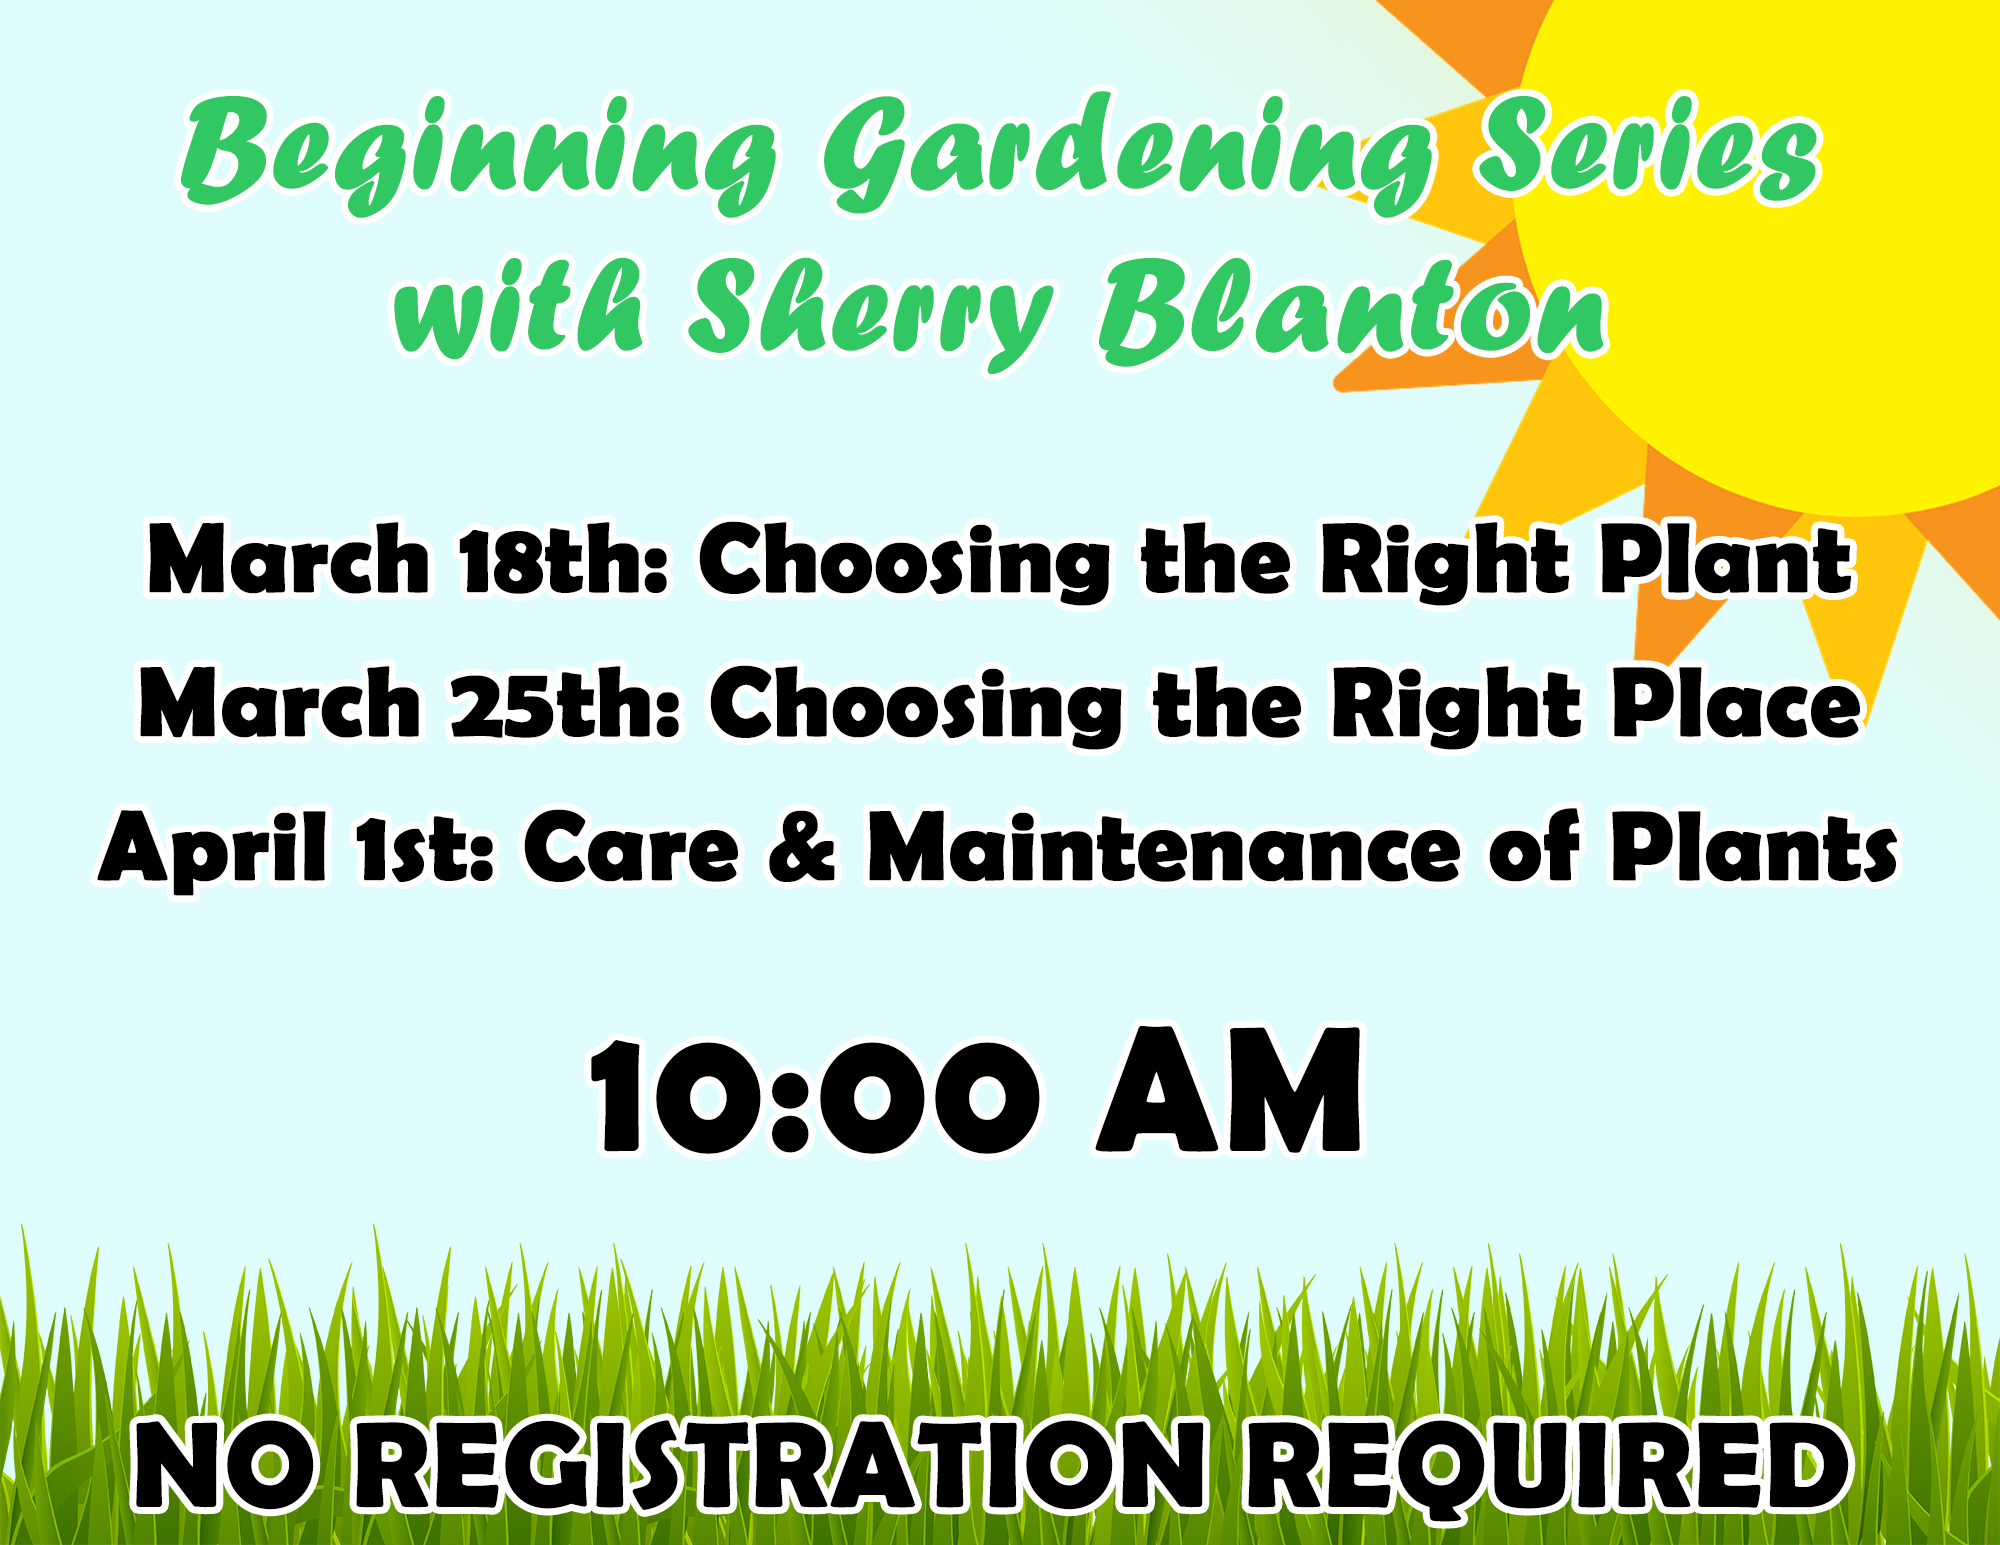 Beginning Gardening Series with Sherry Blanton: March 18th, March 25th and April 1st at 10:00AM. Click for PDF